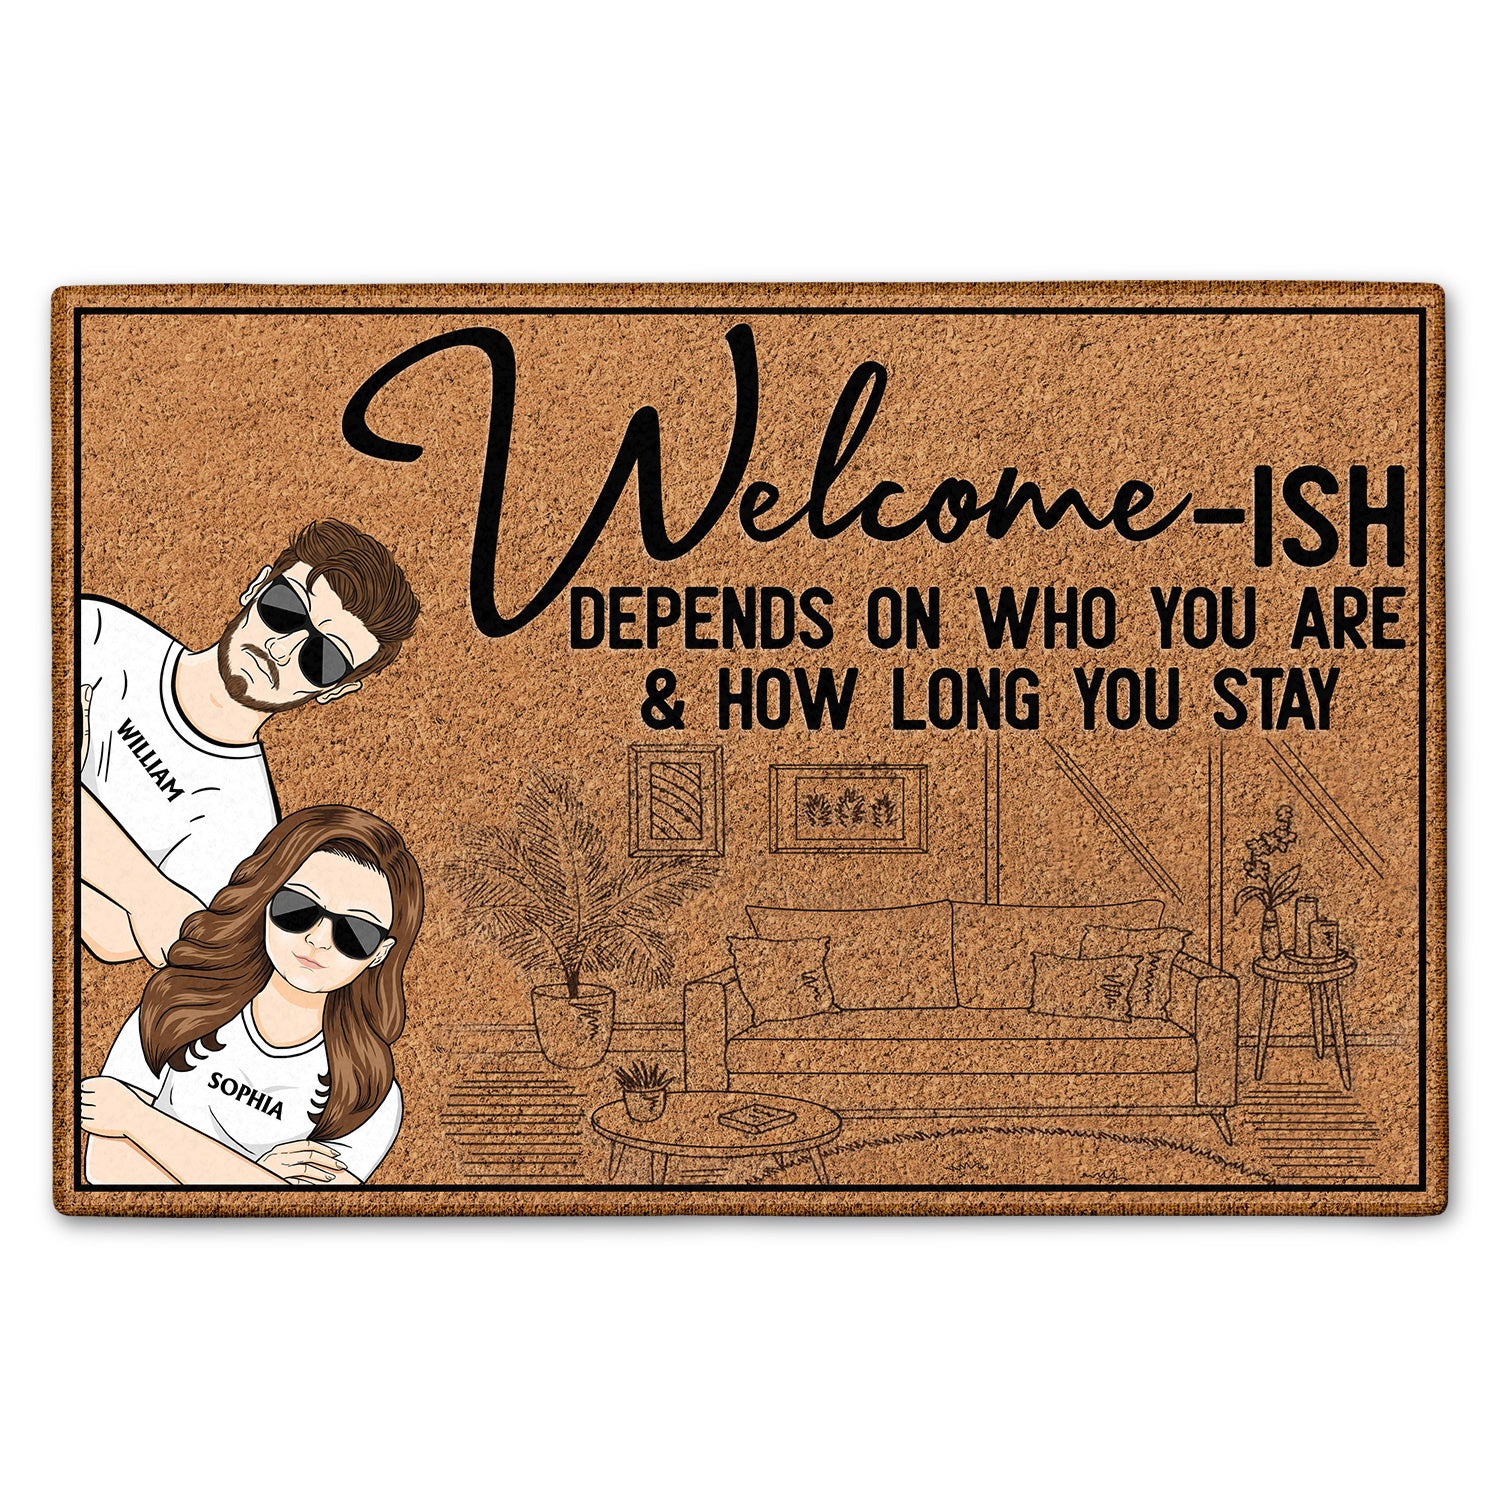 Welcome-ish Depends On Who You Are - Anniversary, Birthday, Home Decor Gift For Spouse, Lover, Husband, Wife, Family, Couple - Personalized Custom Doormat